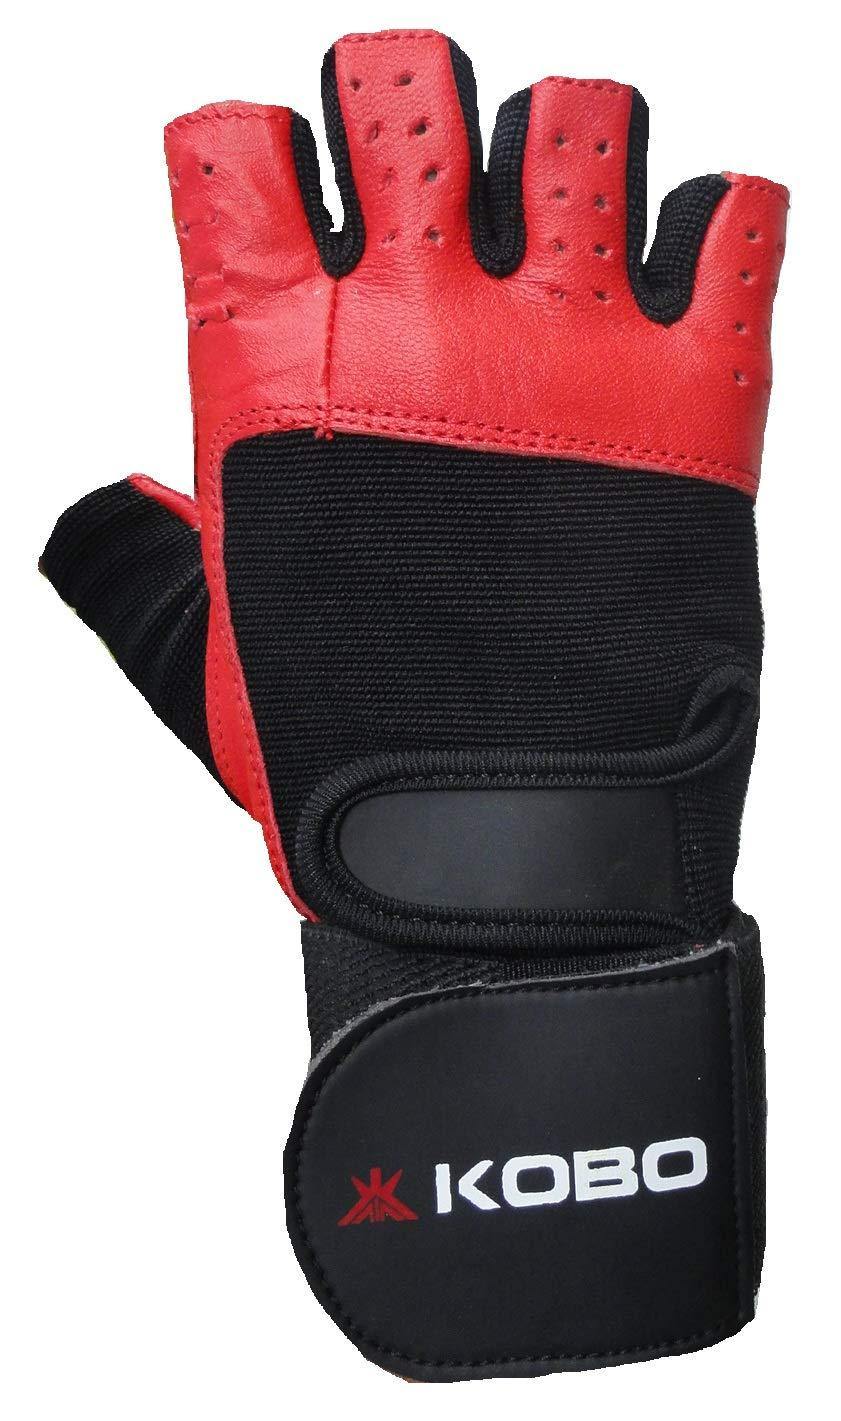 Leather Fitness Gloves/Weight Lifting Gloves/Gym Gloves Red - Best Price online Prokicksports.com